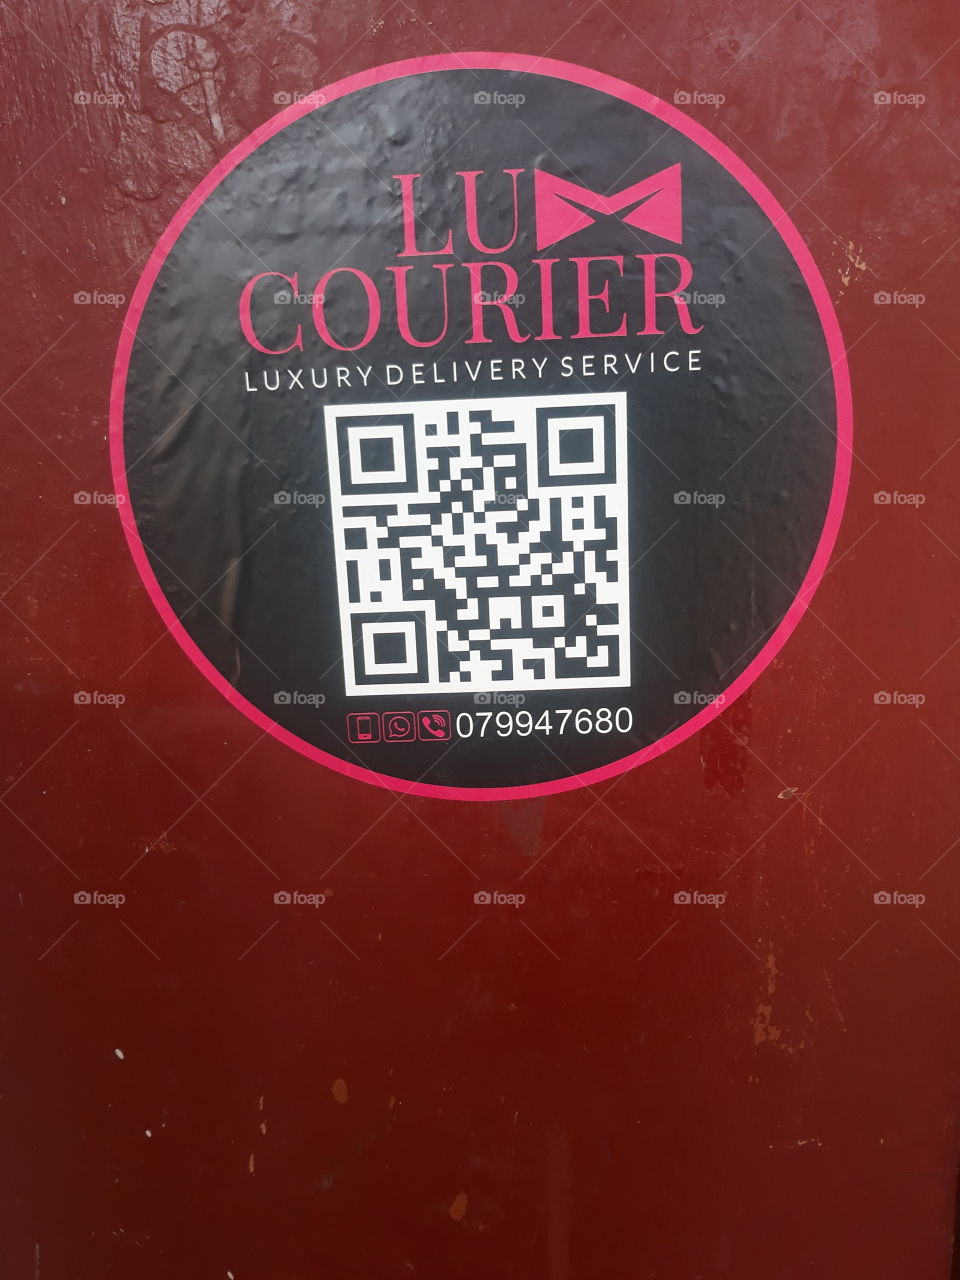 Lux Courier